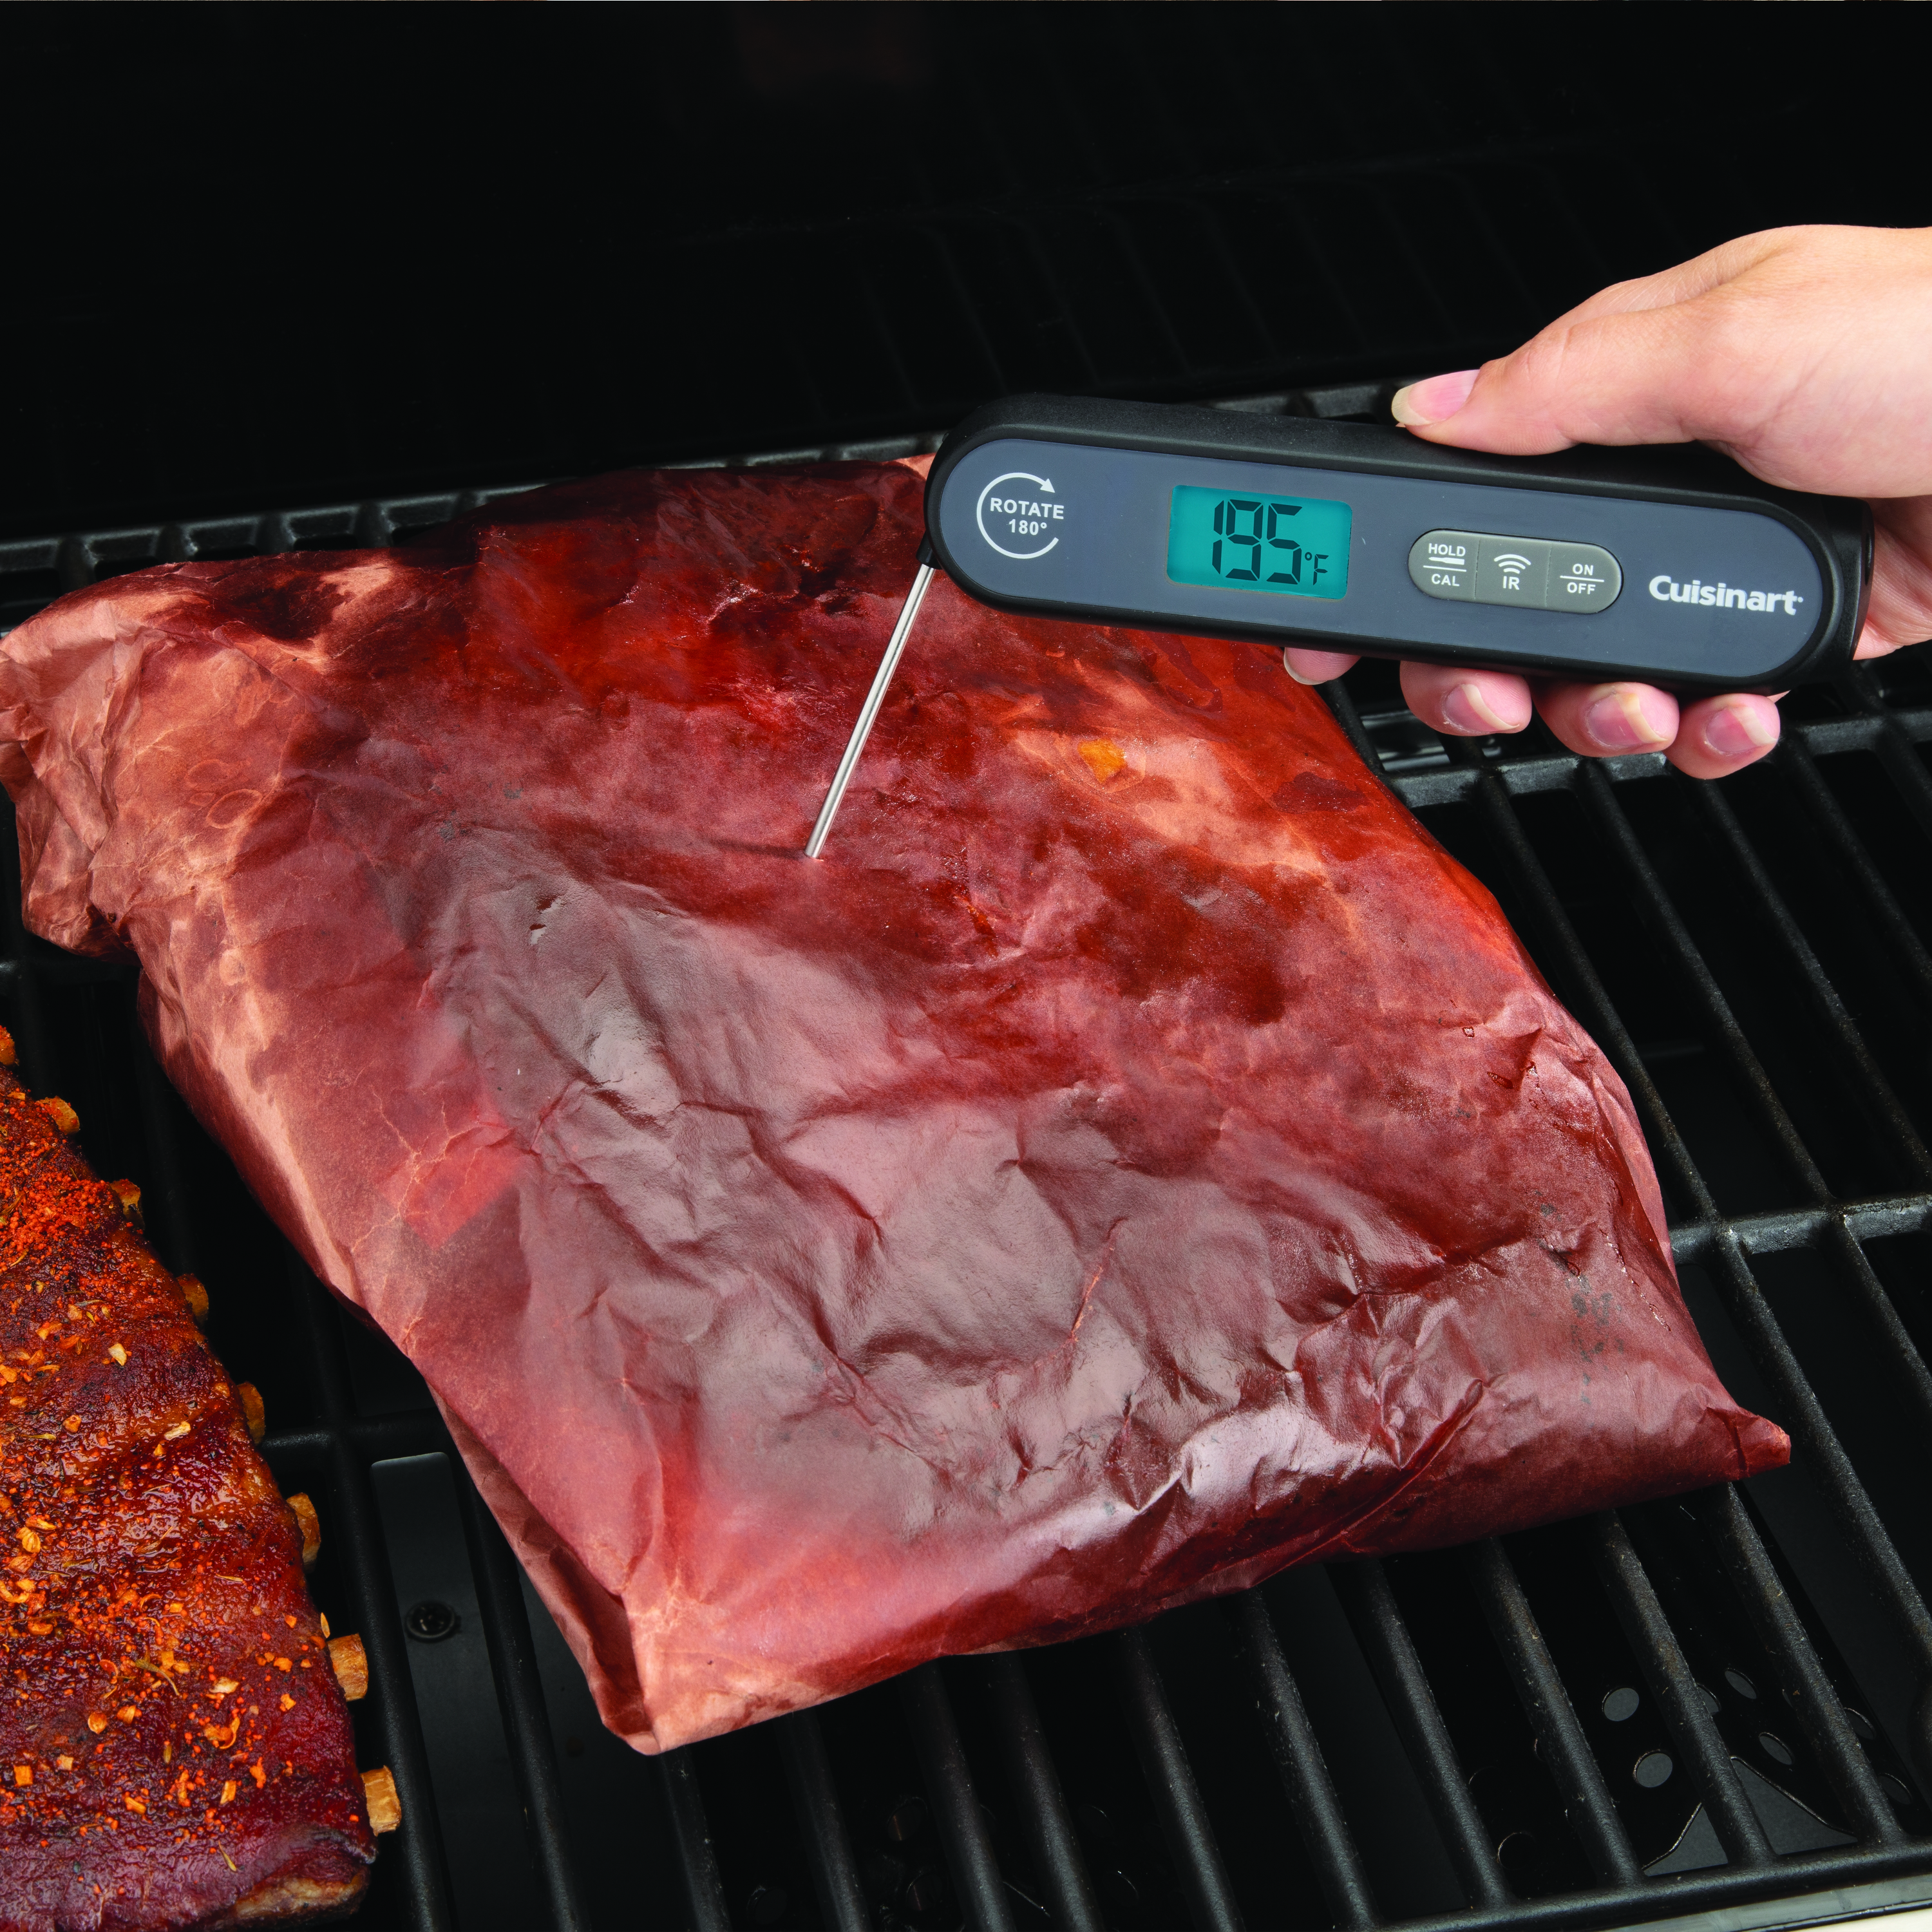 Cuisinart CSG-200 Infared & Folding Grilling Thermometer